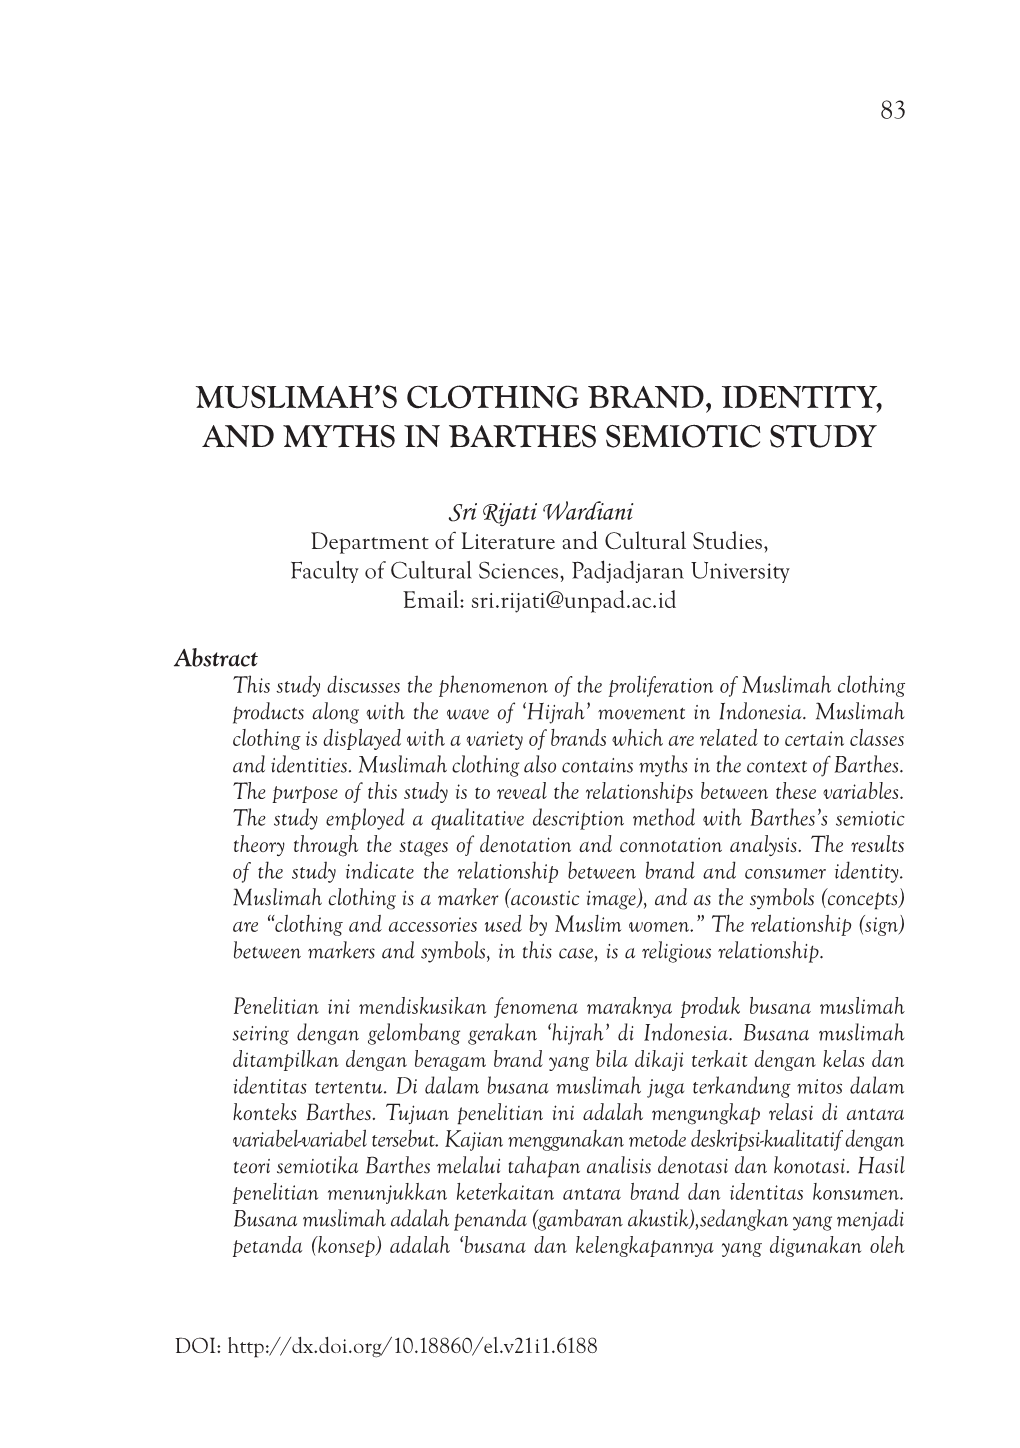 Muslimah's Clothing Brand, Identity, and Myths In